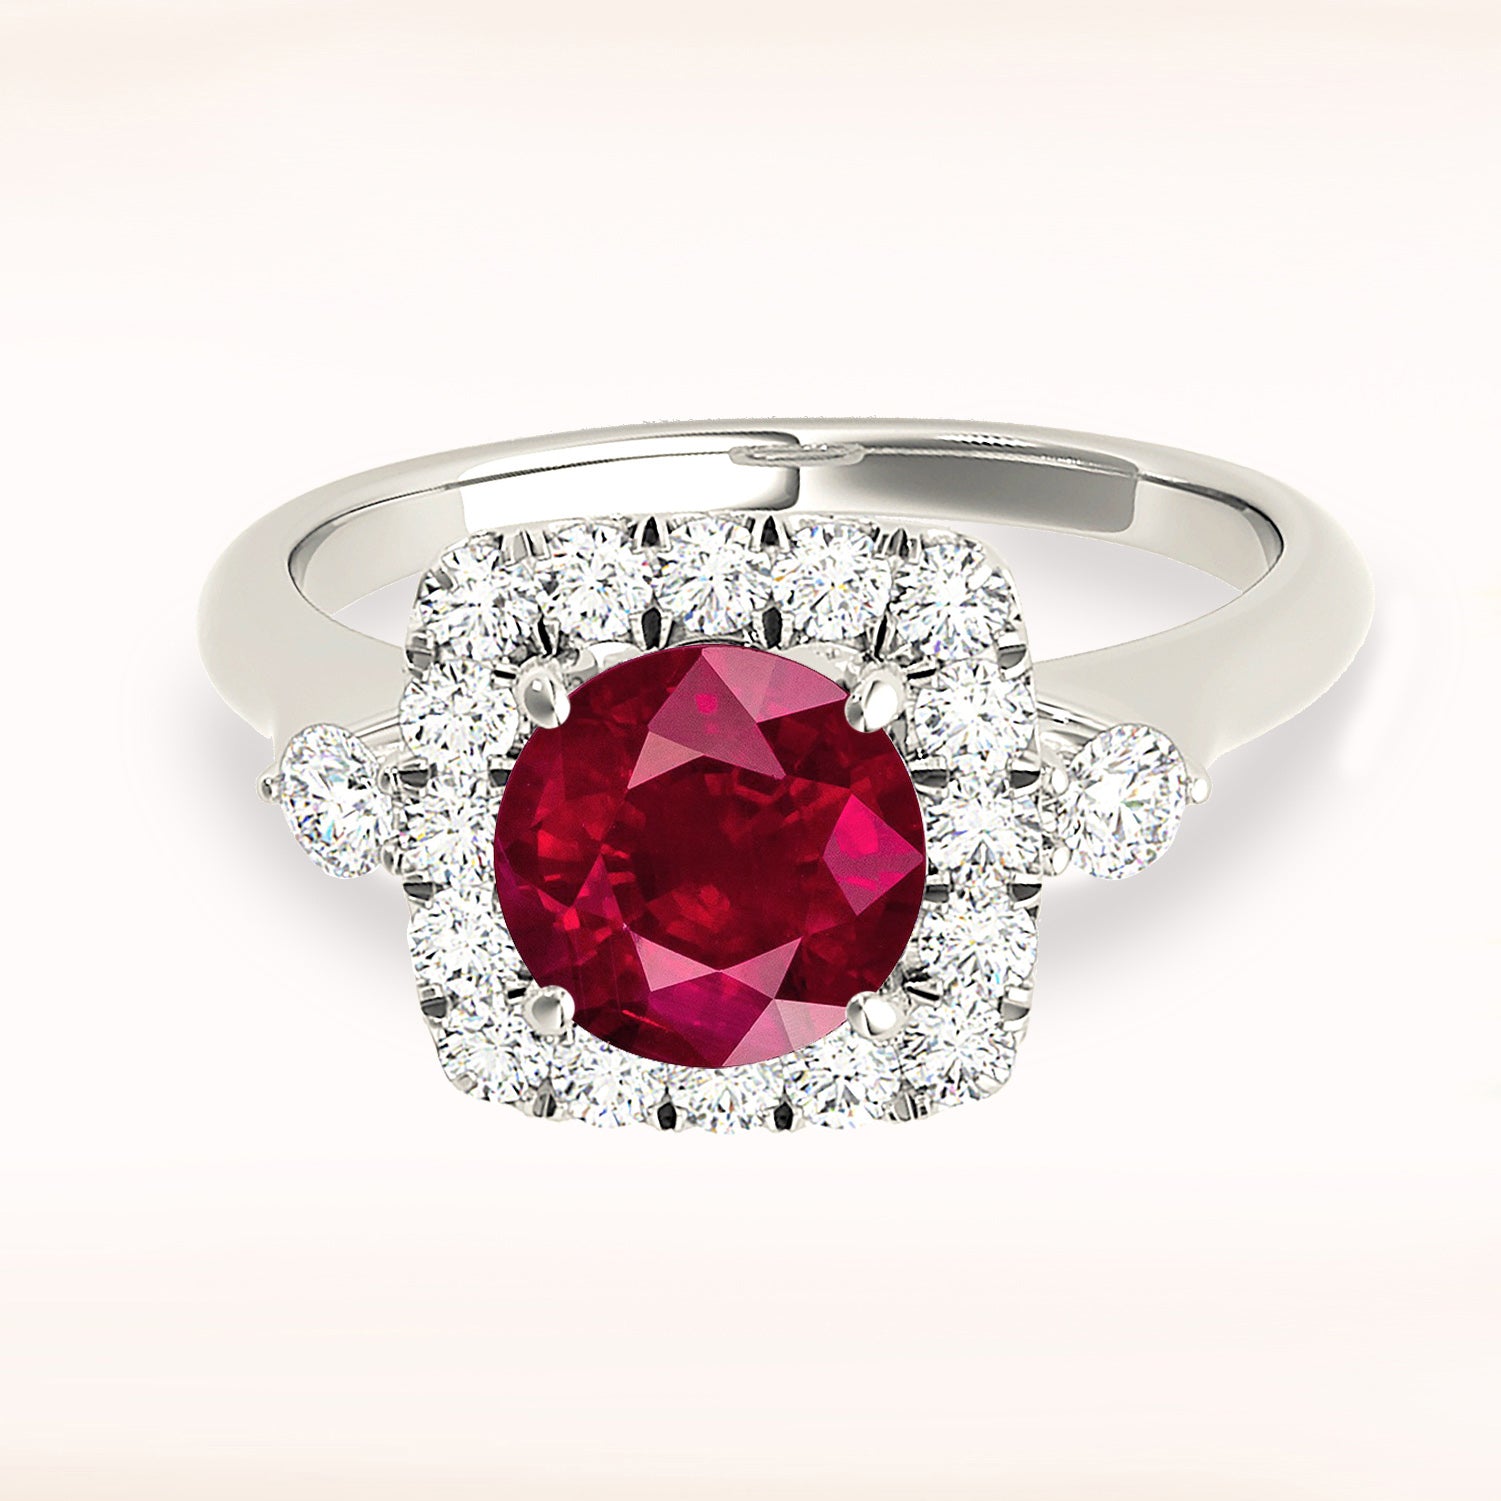 2.35 ct. Genuine Ruby Ring With 0.50 ctw. Diamond Halo And Accent Side Diamonds,Solid Gold Band-in 14K/18K White, Yellow, Rose Gold and Platinum - Christmas Jewelry Gift -VIRABYANI